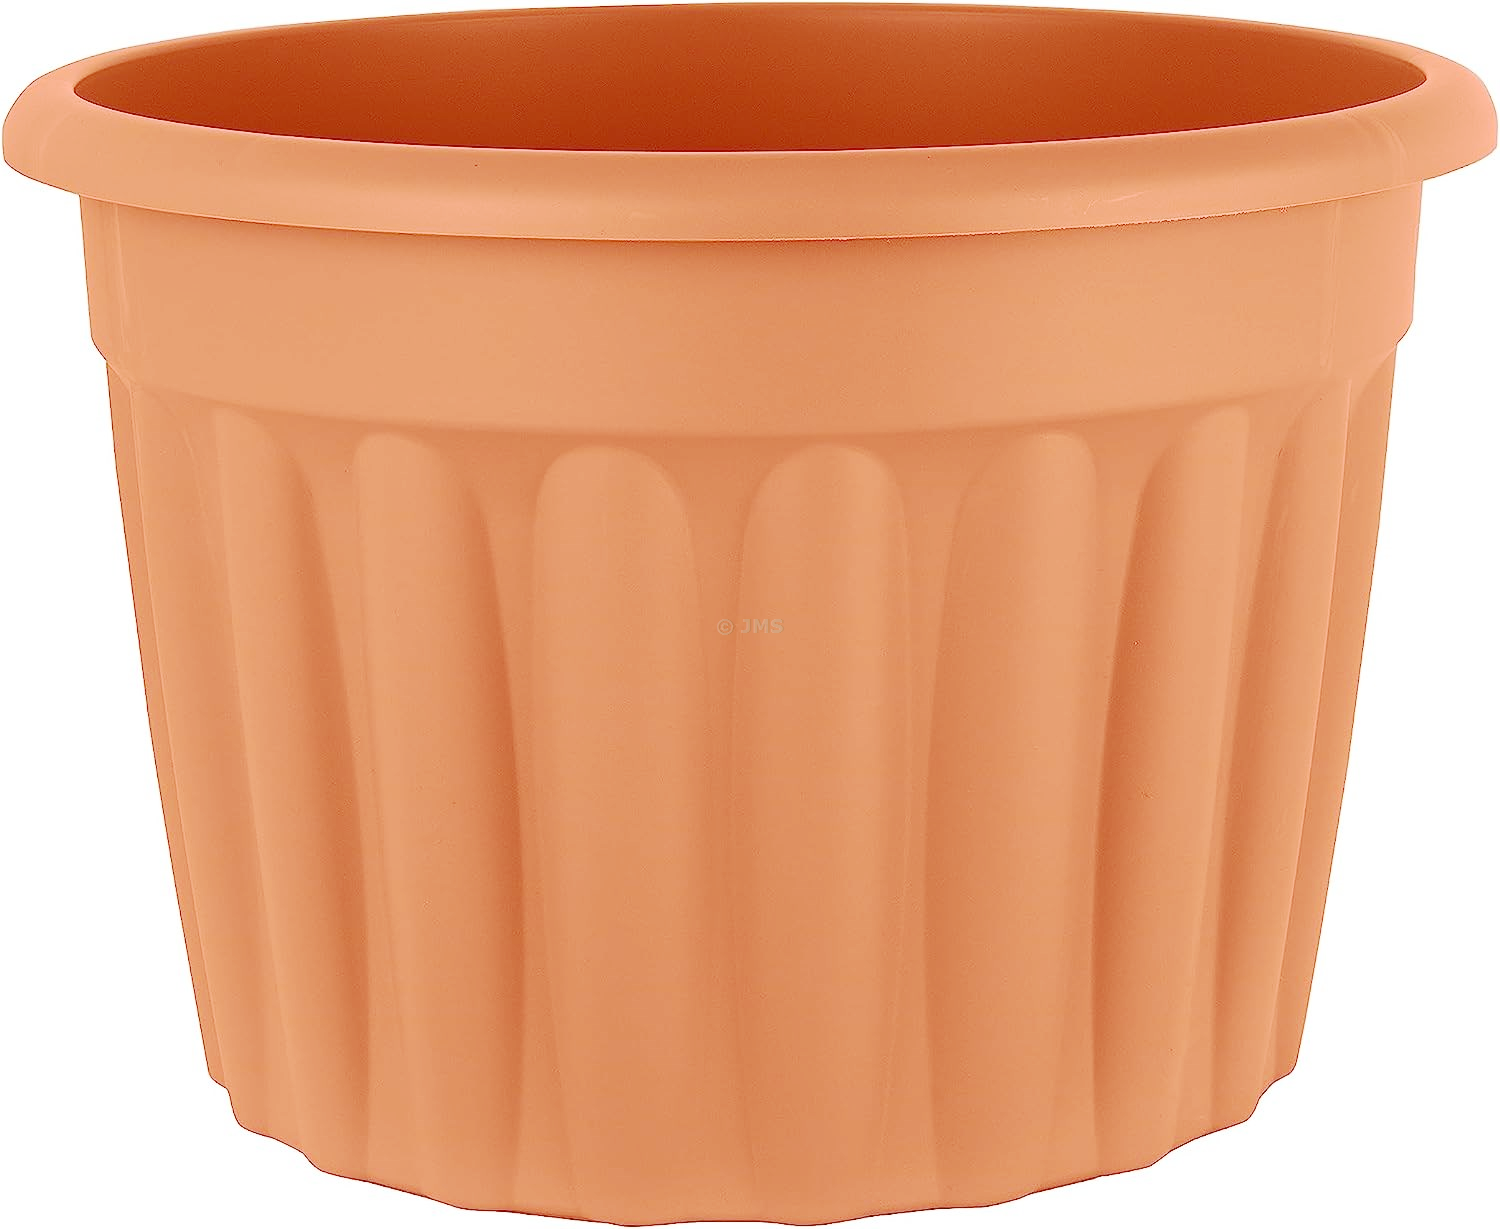 Extra Large 60cm Round Garden Planter (69 Litres)Terracotta Home Office Cafe Restaurant - Made in Britain